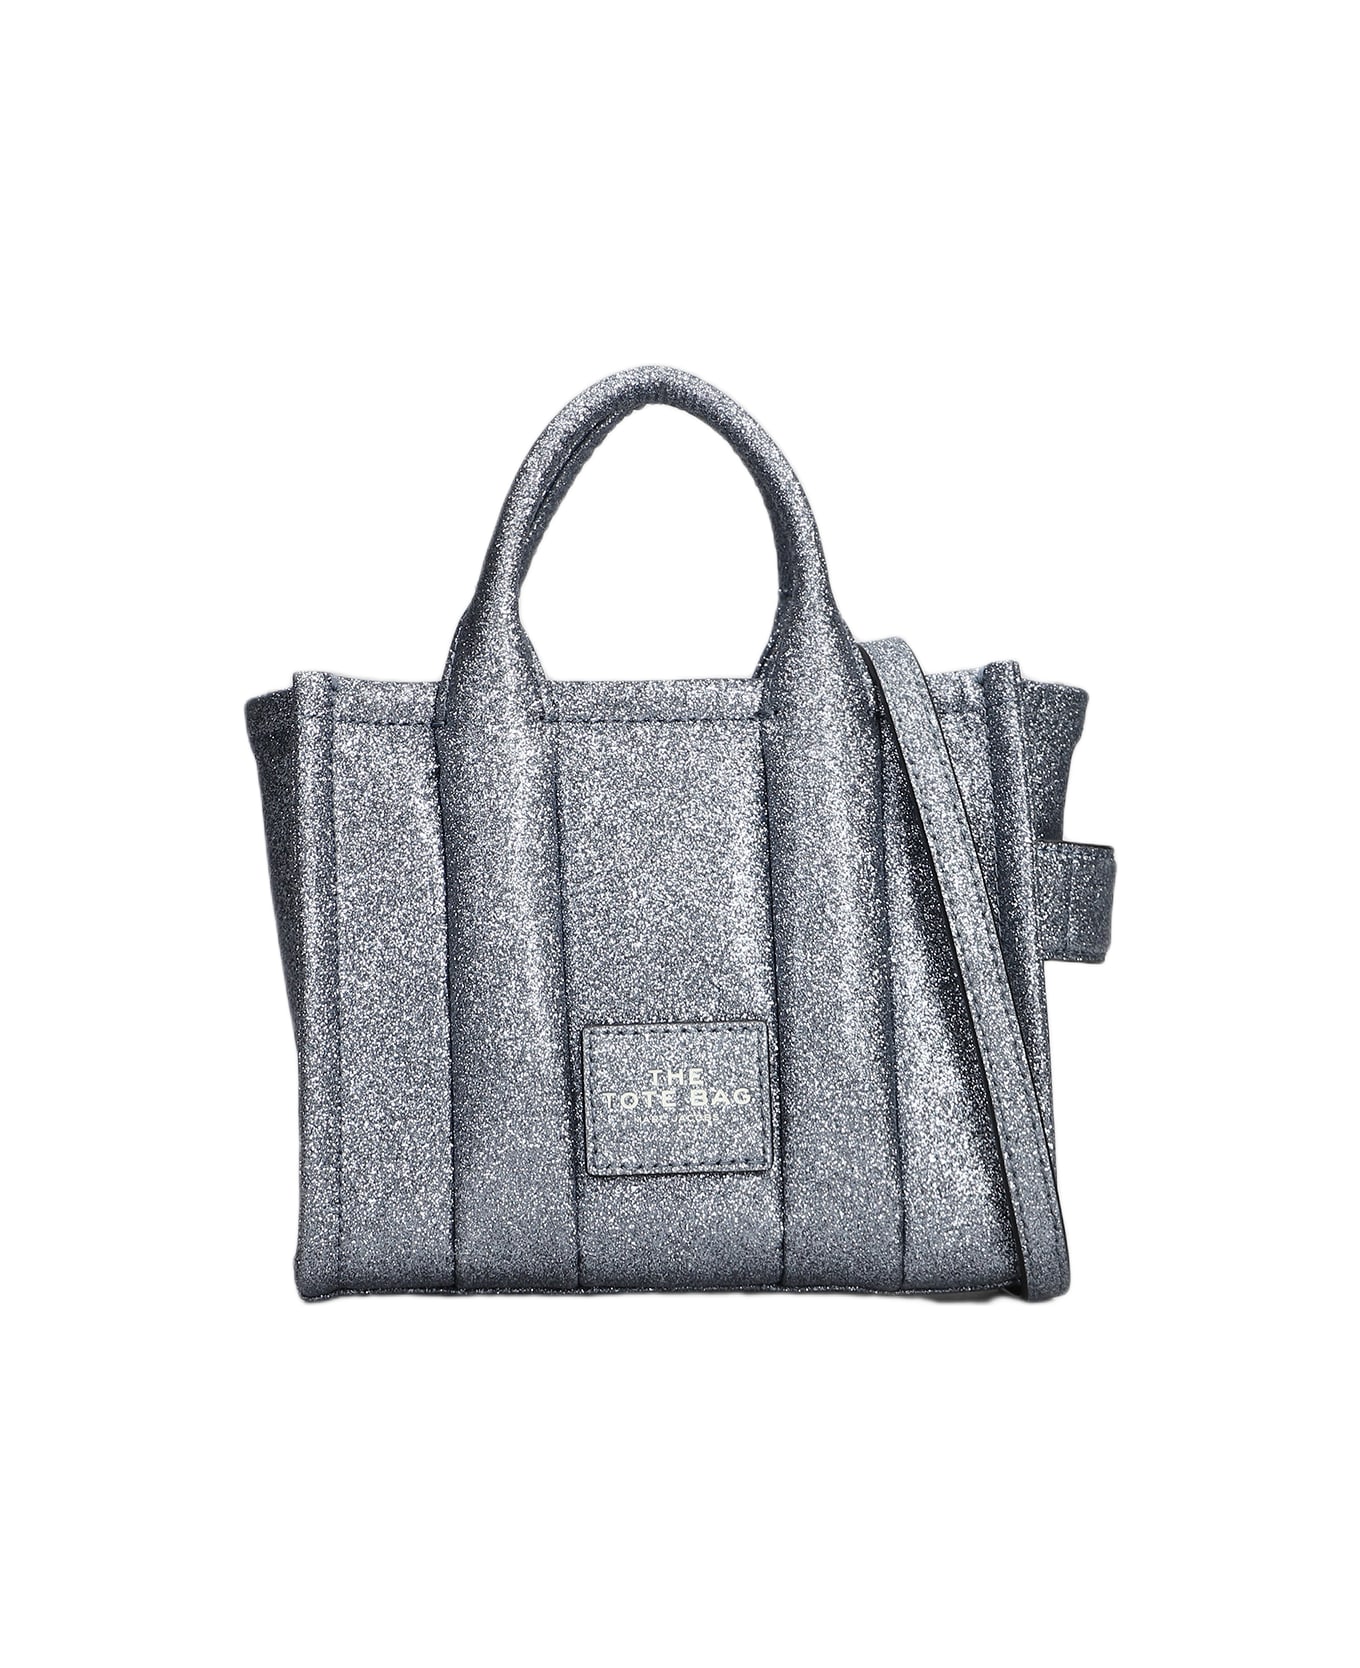 Marc Jacobs The Mini Tote Bag - Silver トートバッグ